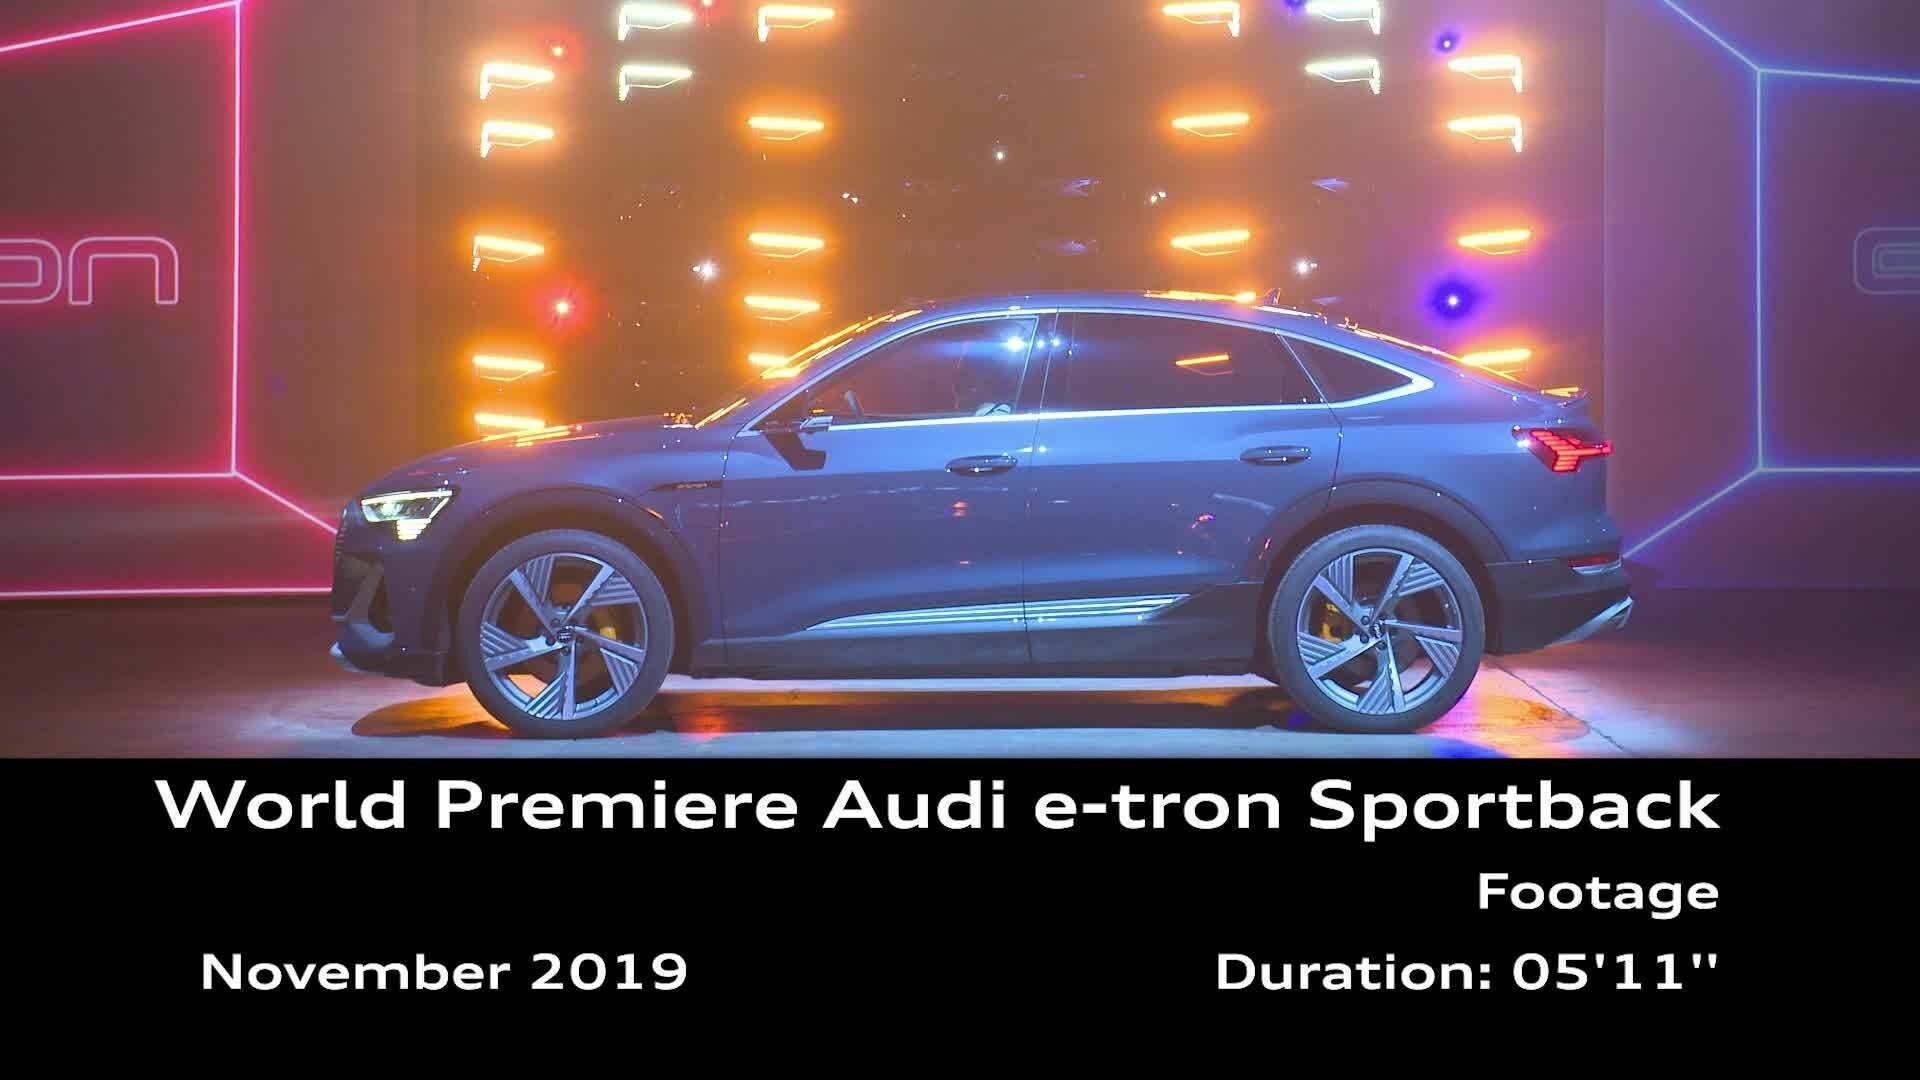 Footage: world premiere of the Audi e-tron Sportback in Los Angeles